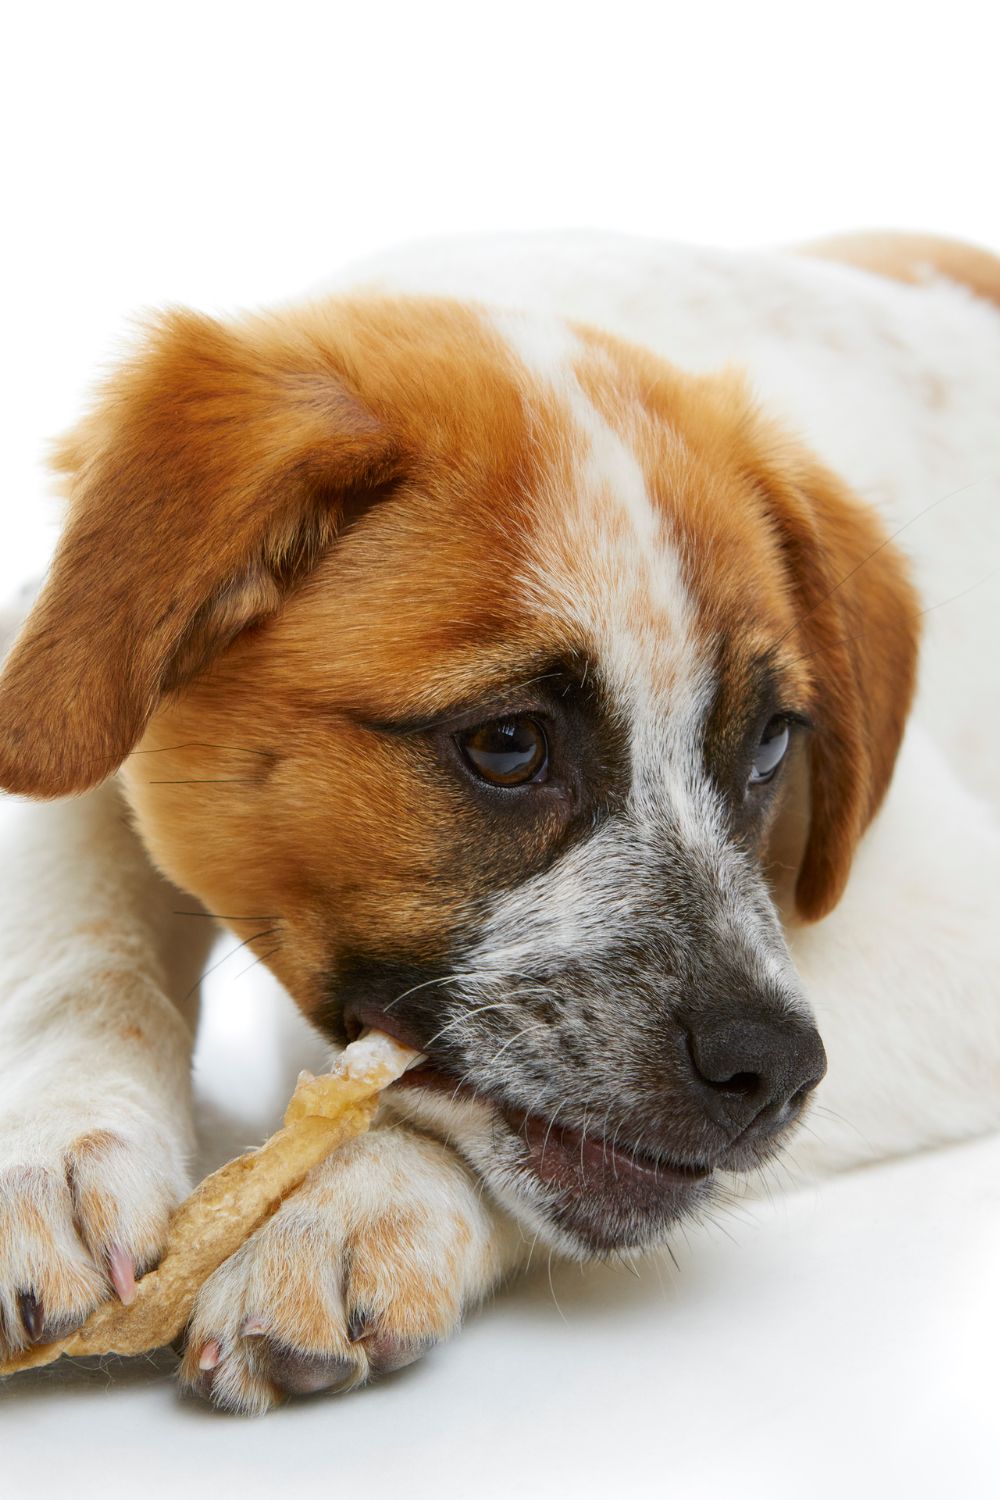 7 Great Dog Treats to Give Your Fur Baby